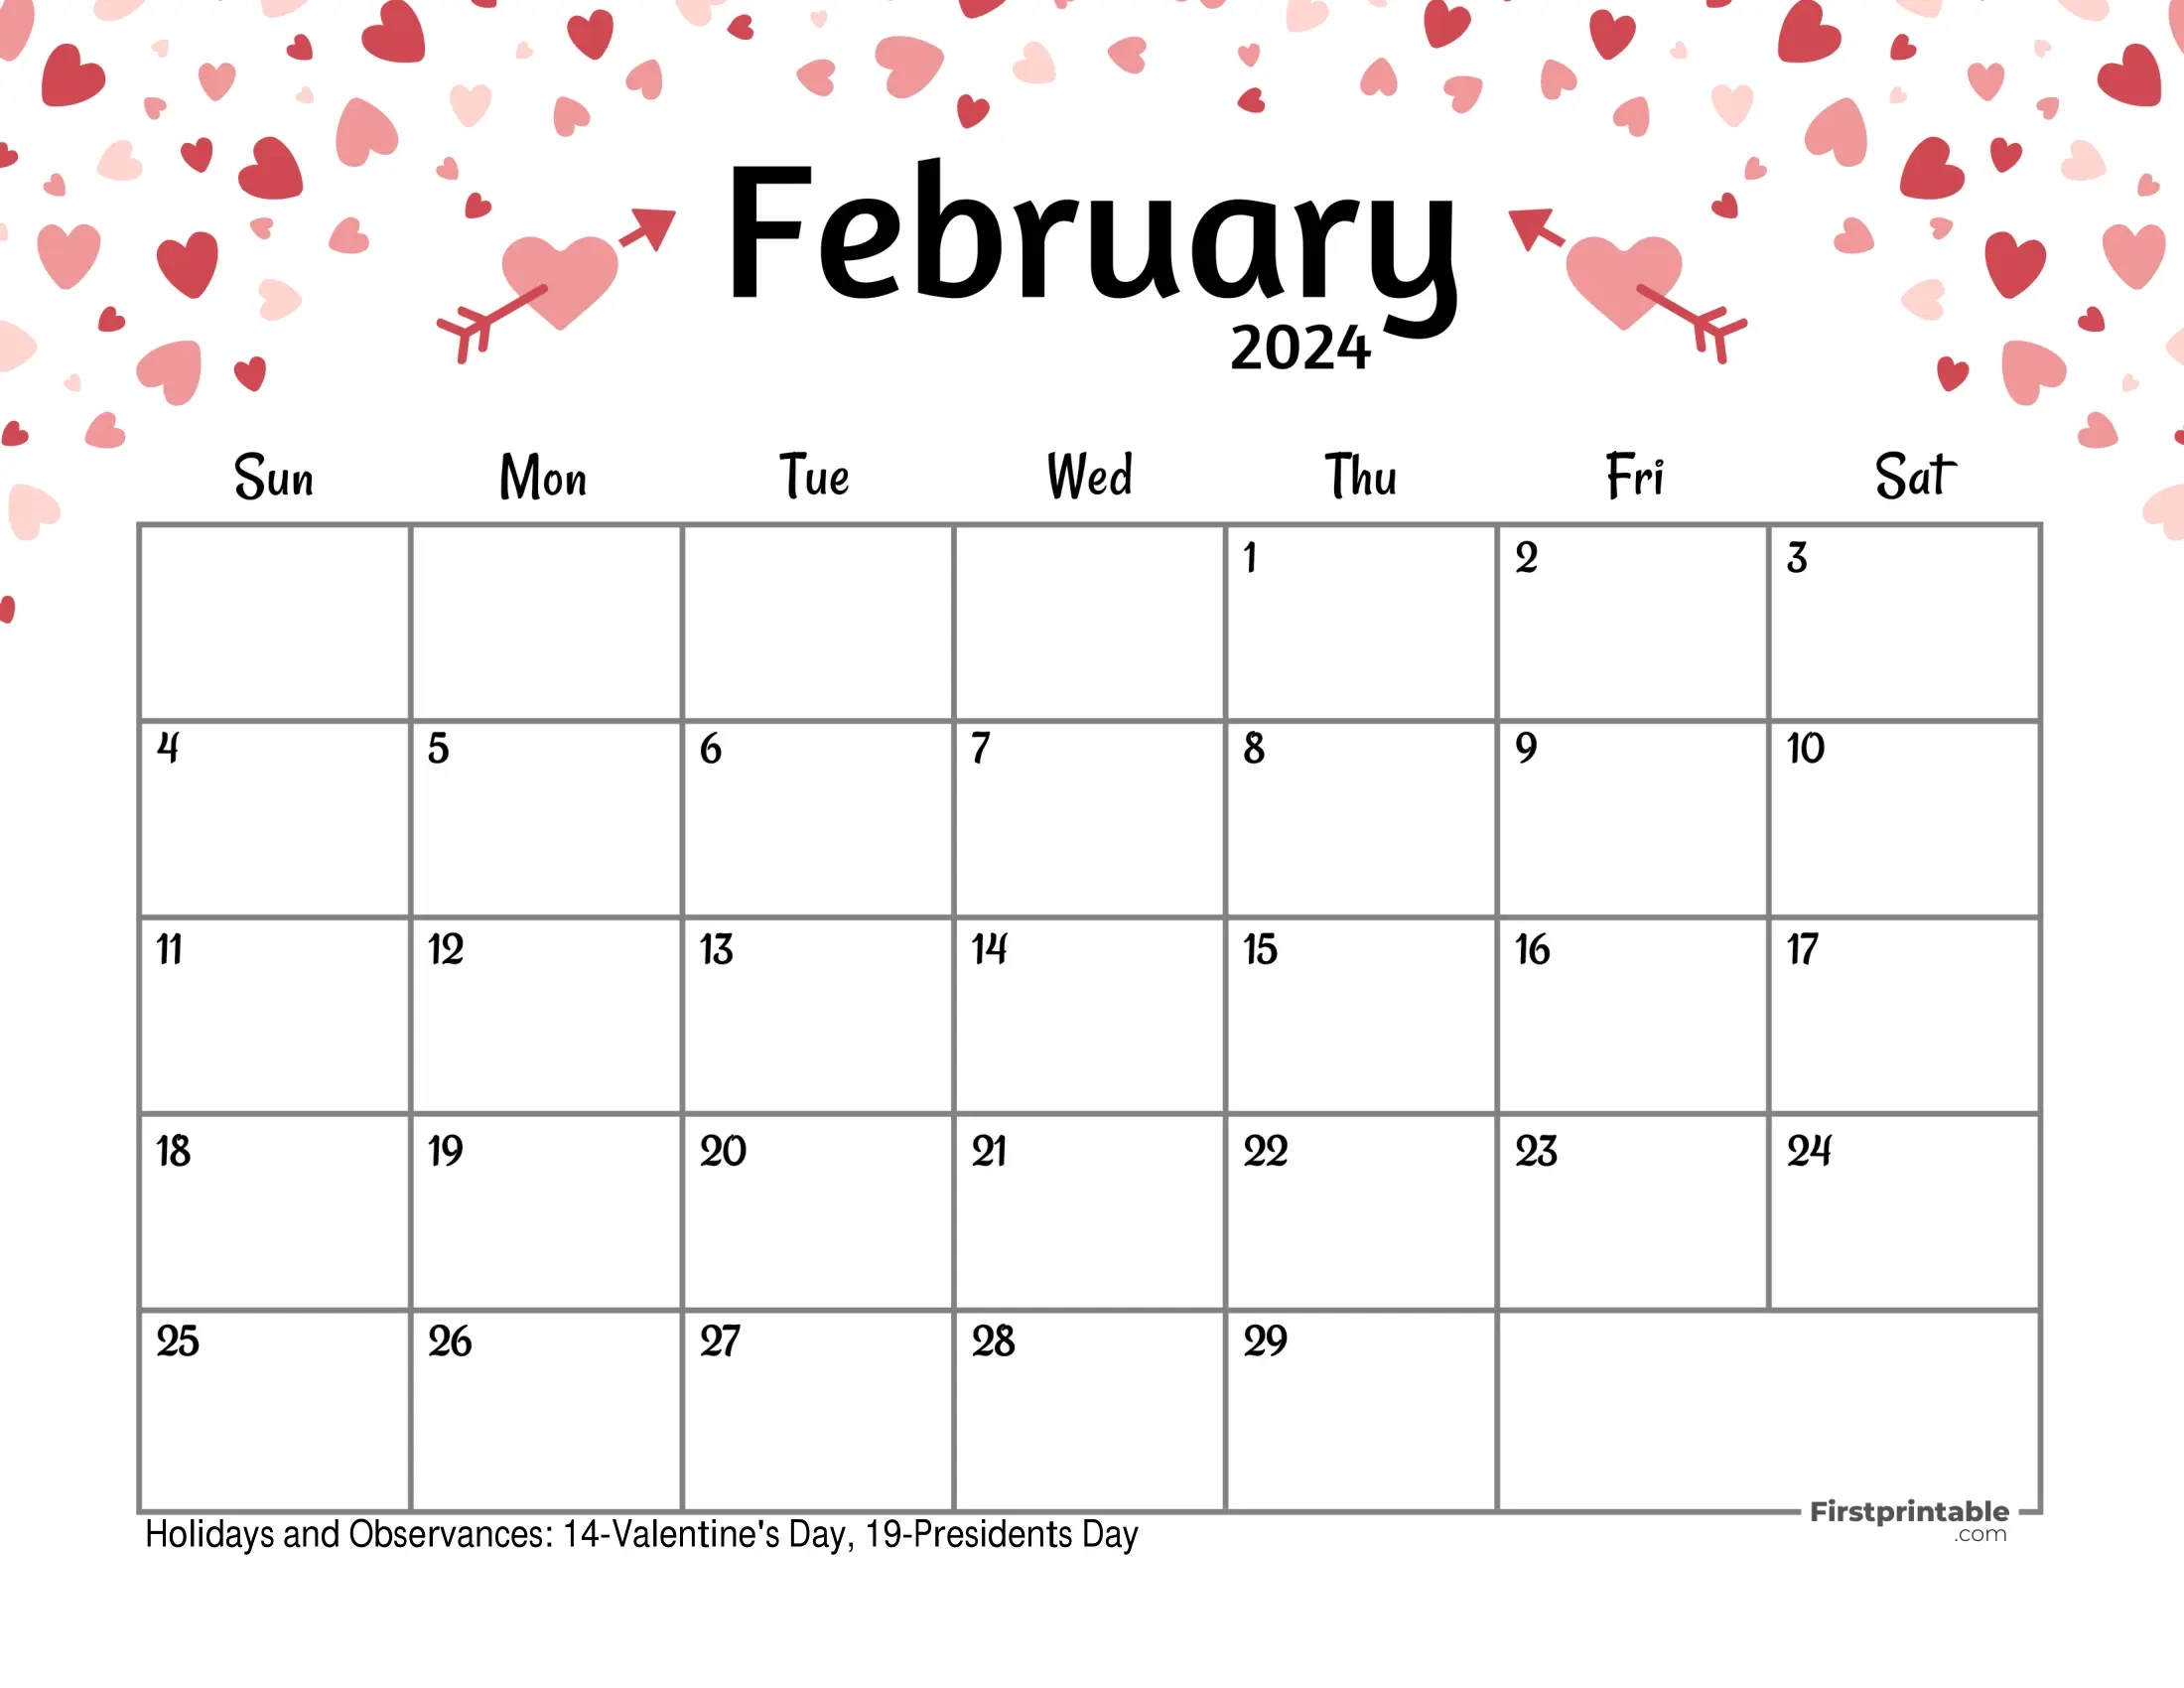 Free Printable &amp;amp; Fillable February Calendar 2024 regarding Free Printable Calendar 2024 Editable